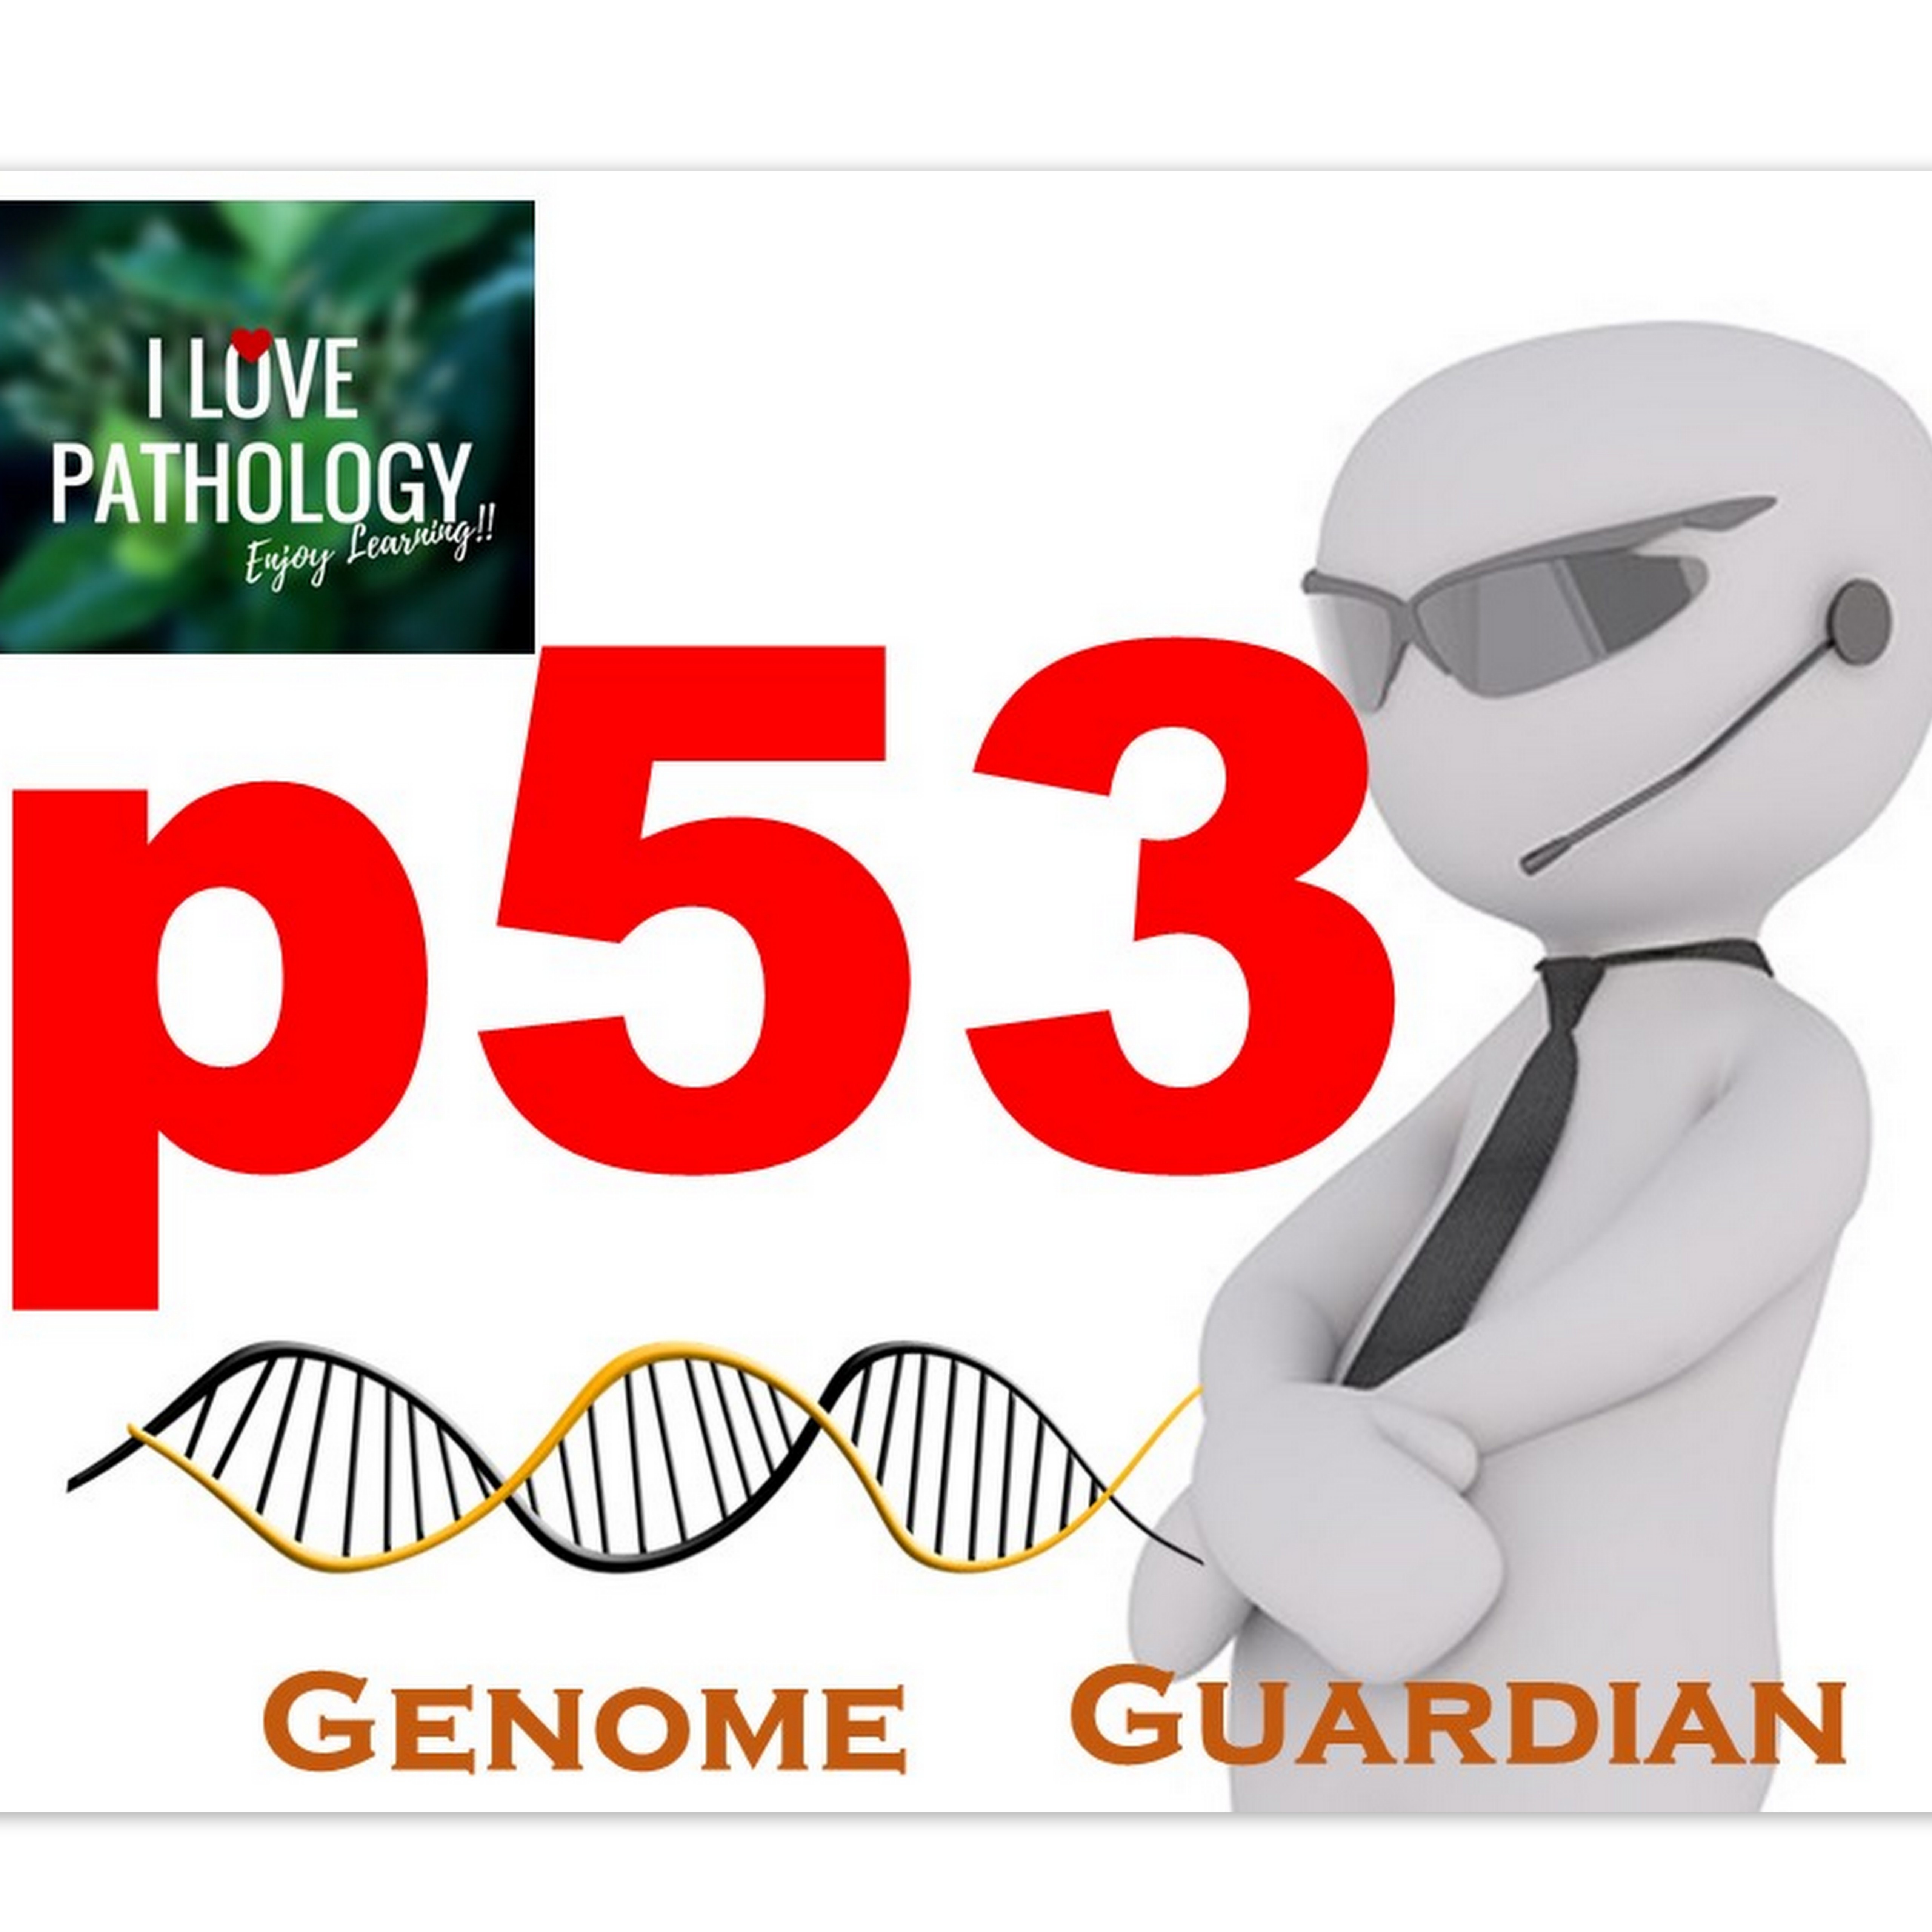 p53 Gene: The Guardian of the Genome